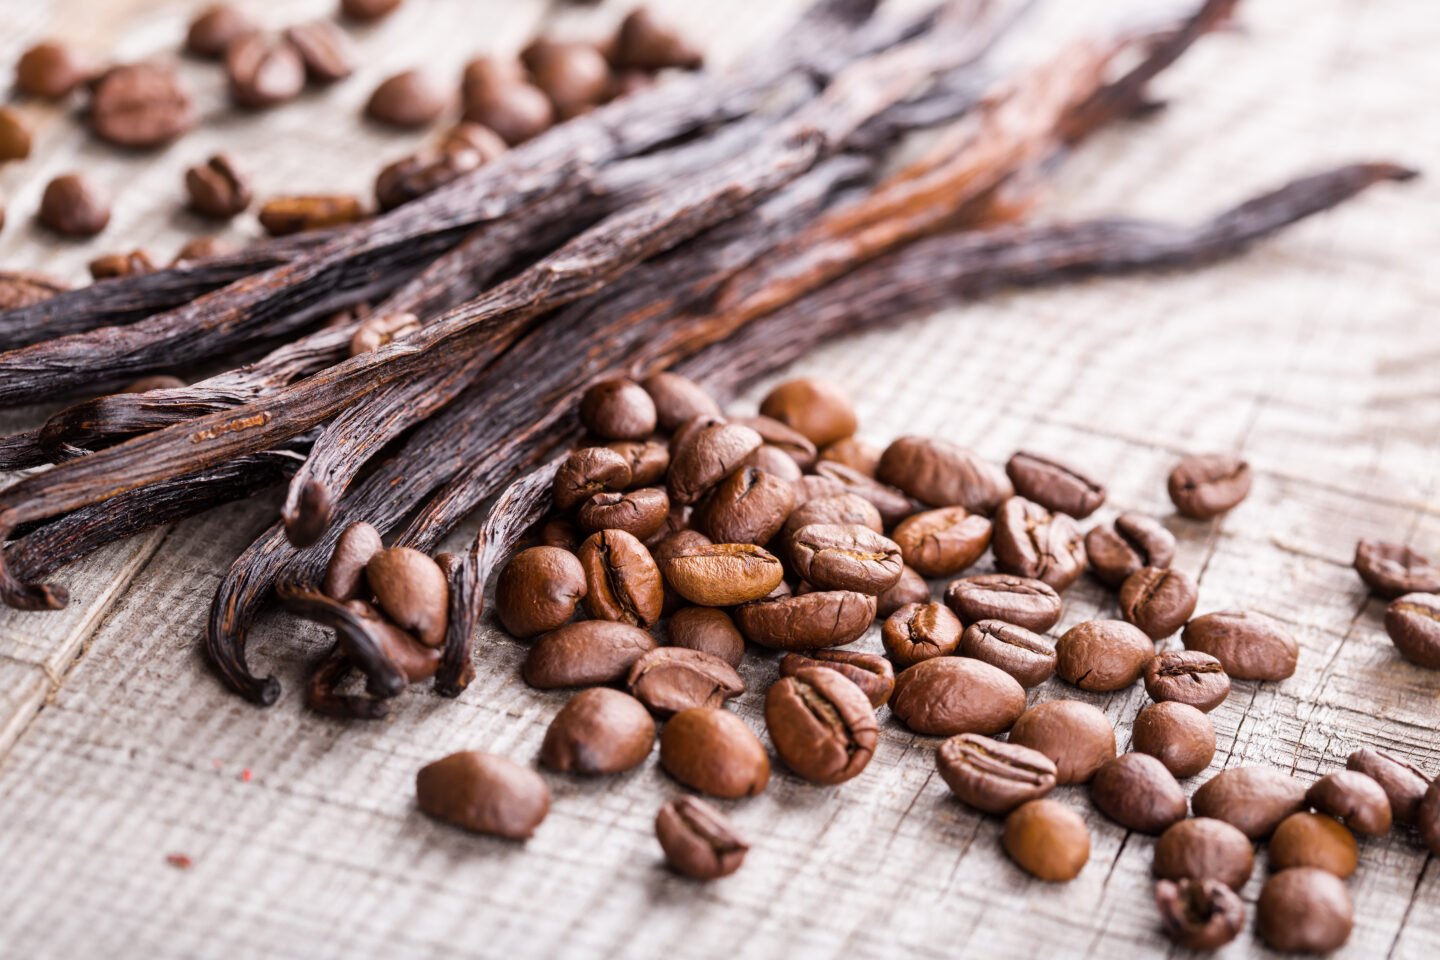 Vanilla,Pods,And,Coffee,Beans,On,Wooden,Background